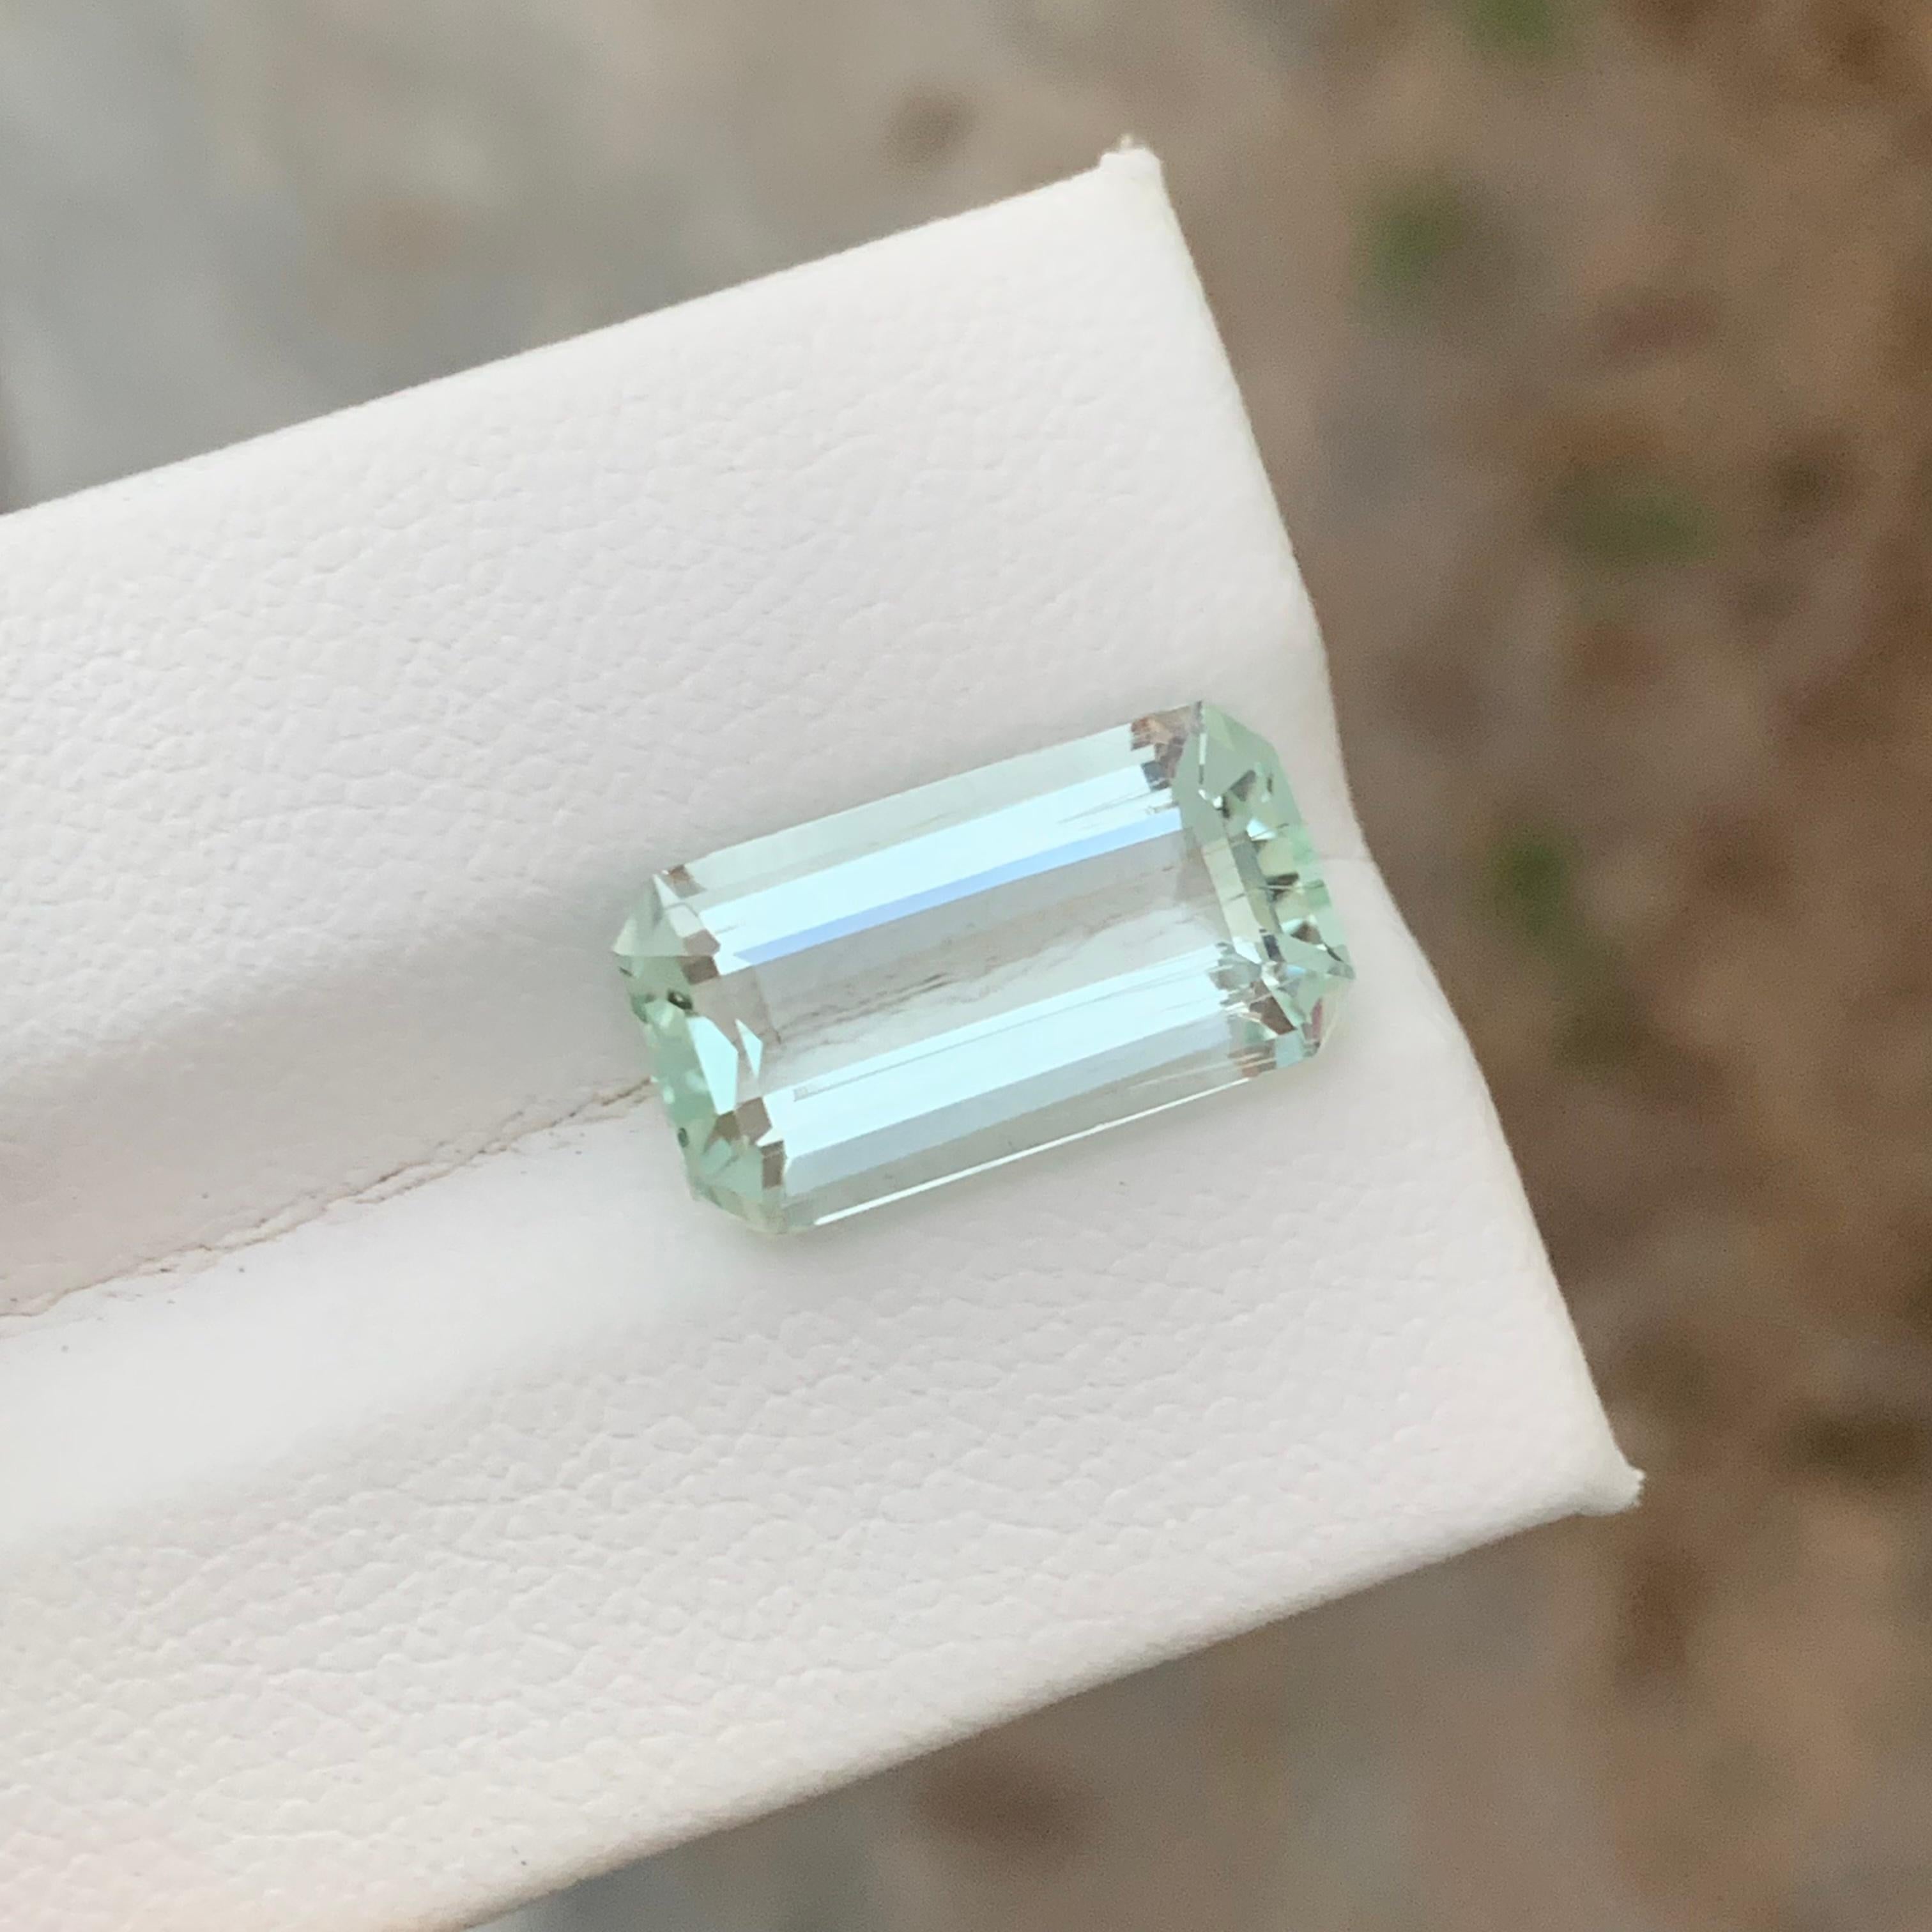 Loose Aquamarine 
Weight: 6.55 Carats 
Dimension: 16.3x8.8x6 Mm
Origin: Africa 
Color: Light Green
Shape: Emerald 
Treatment: Natural 
Certificate: On Customer Demand 
Green aquamarine, a captivating and lesser-known variety of the popular